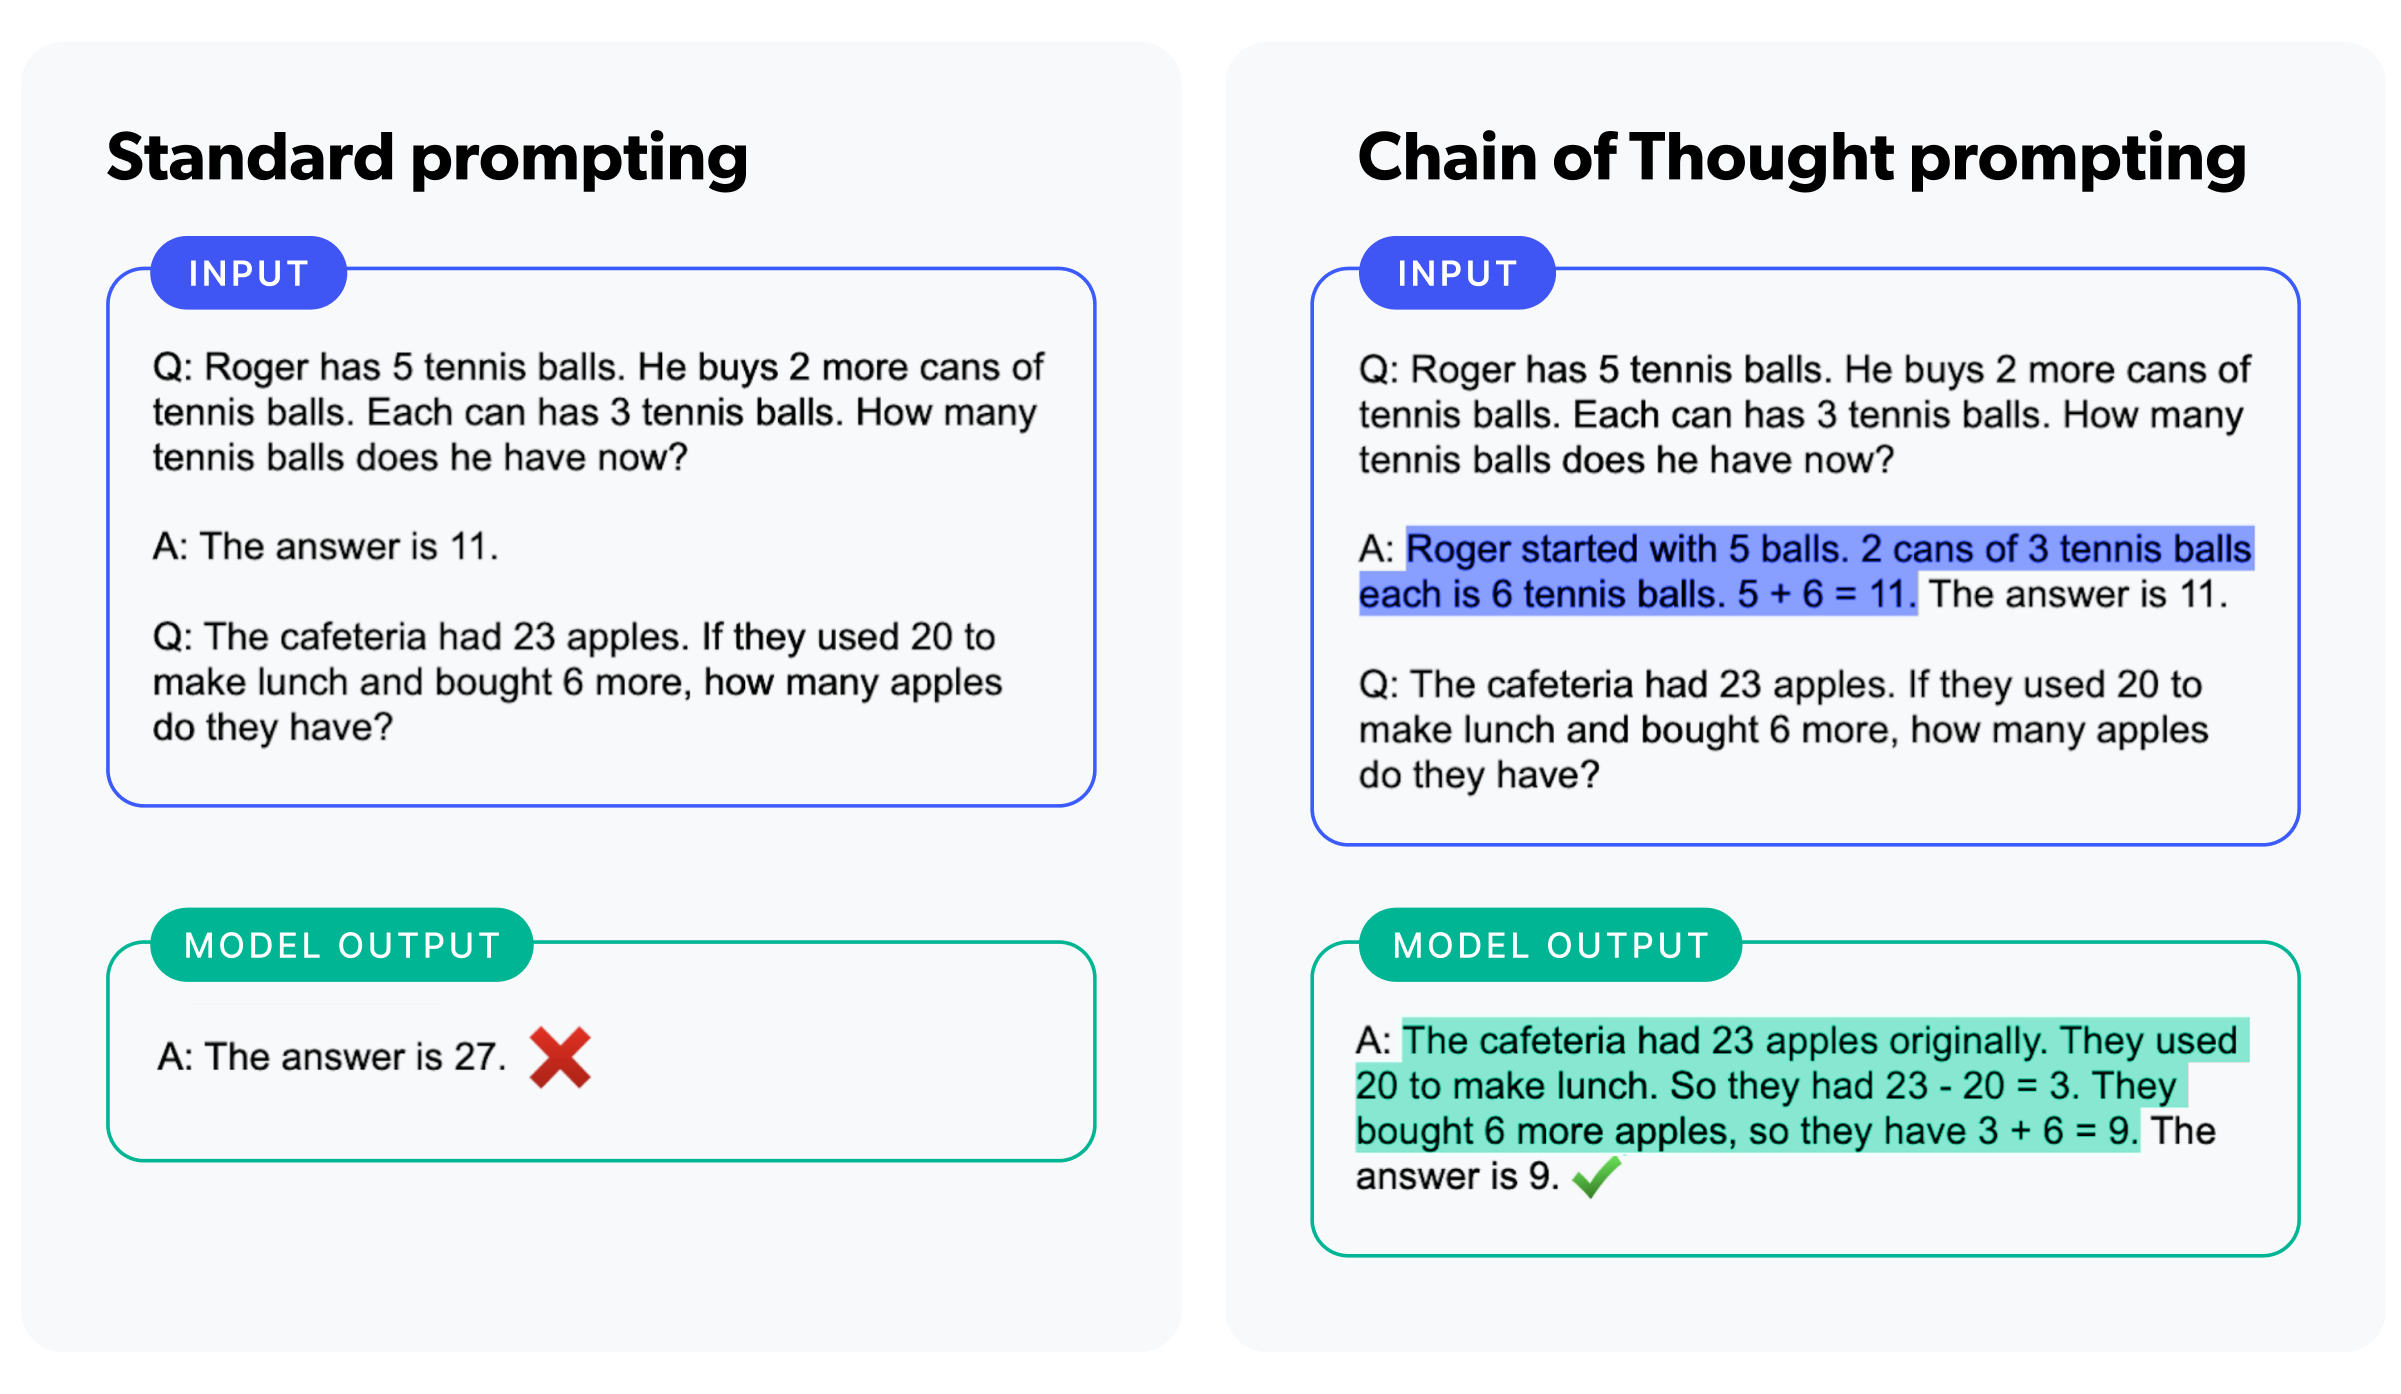 Standard prompting versus Chain of thought prompting.